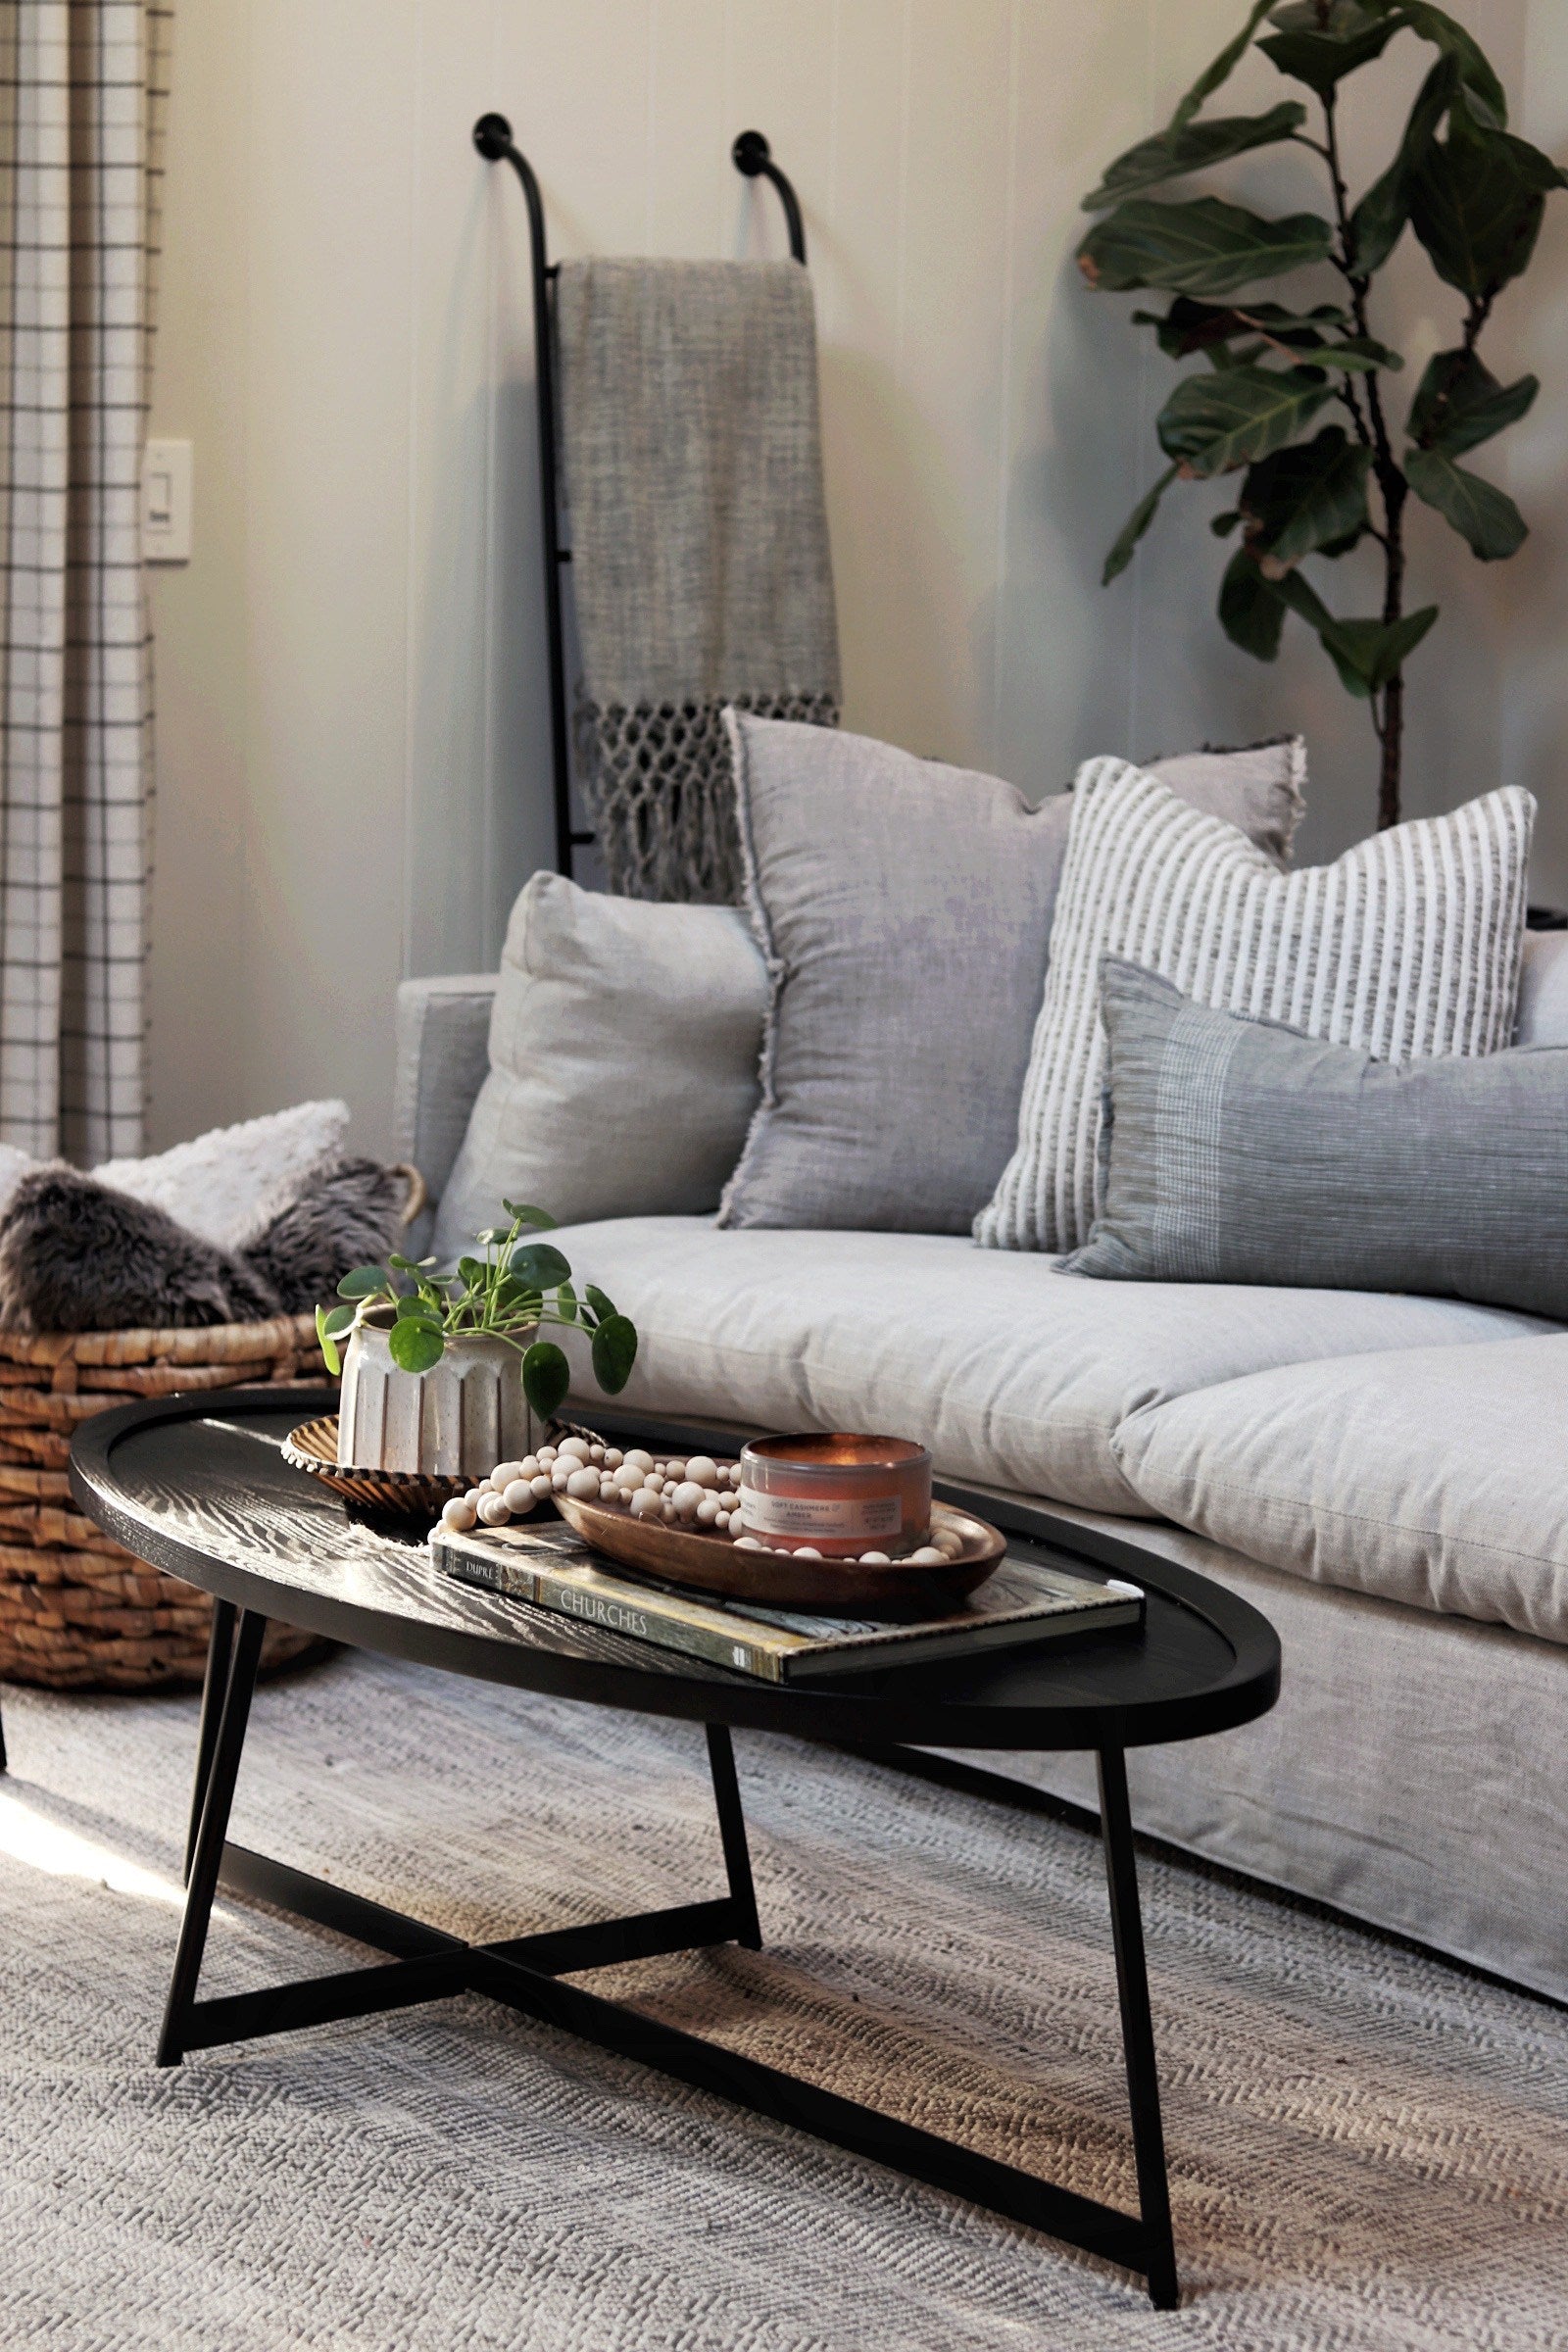 A black oval wooden coffee table holds a small potted house plant, books and decorative beads. Behind the table is a light gray slipcovered Arlen sofa with gray pillows.